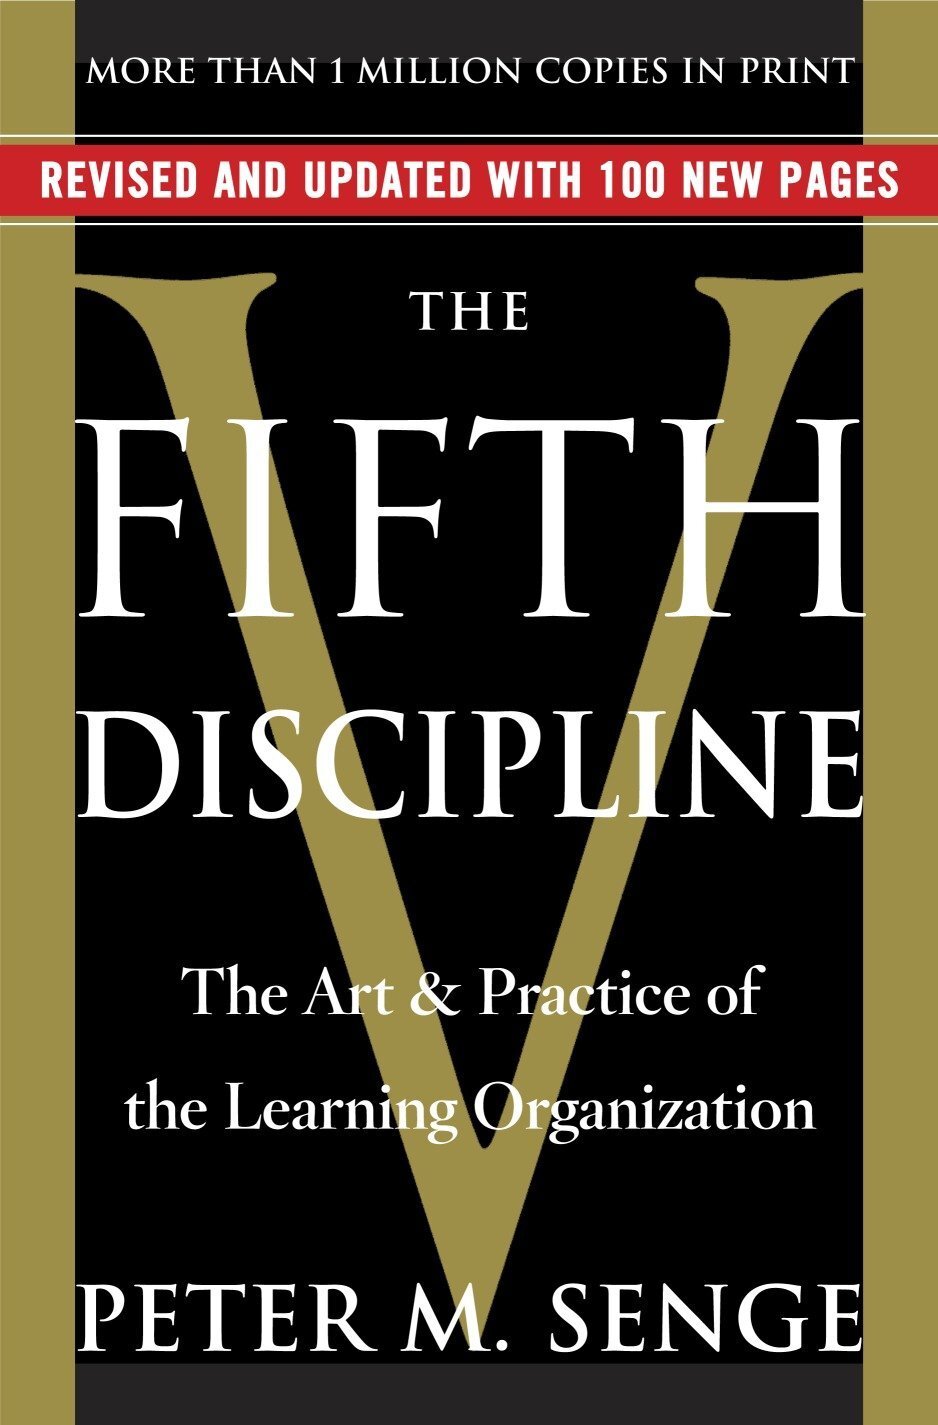 The Fifth Discipline: The Art & Practice of Learning Organization - Peter Senge